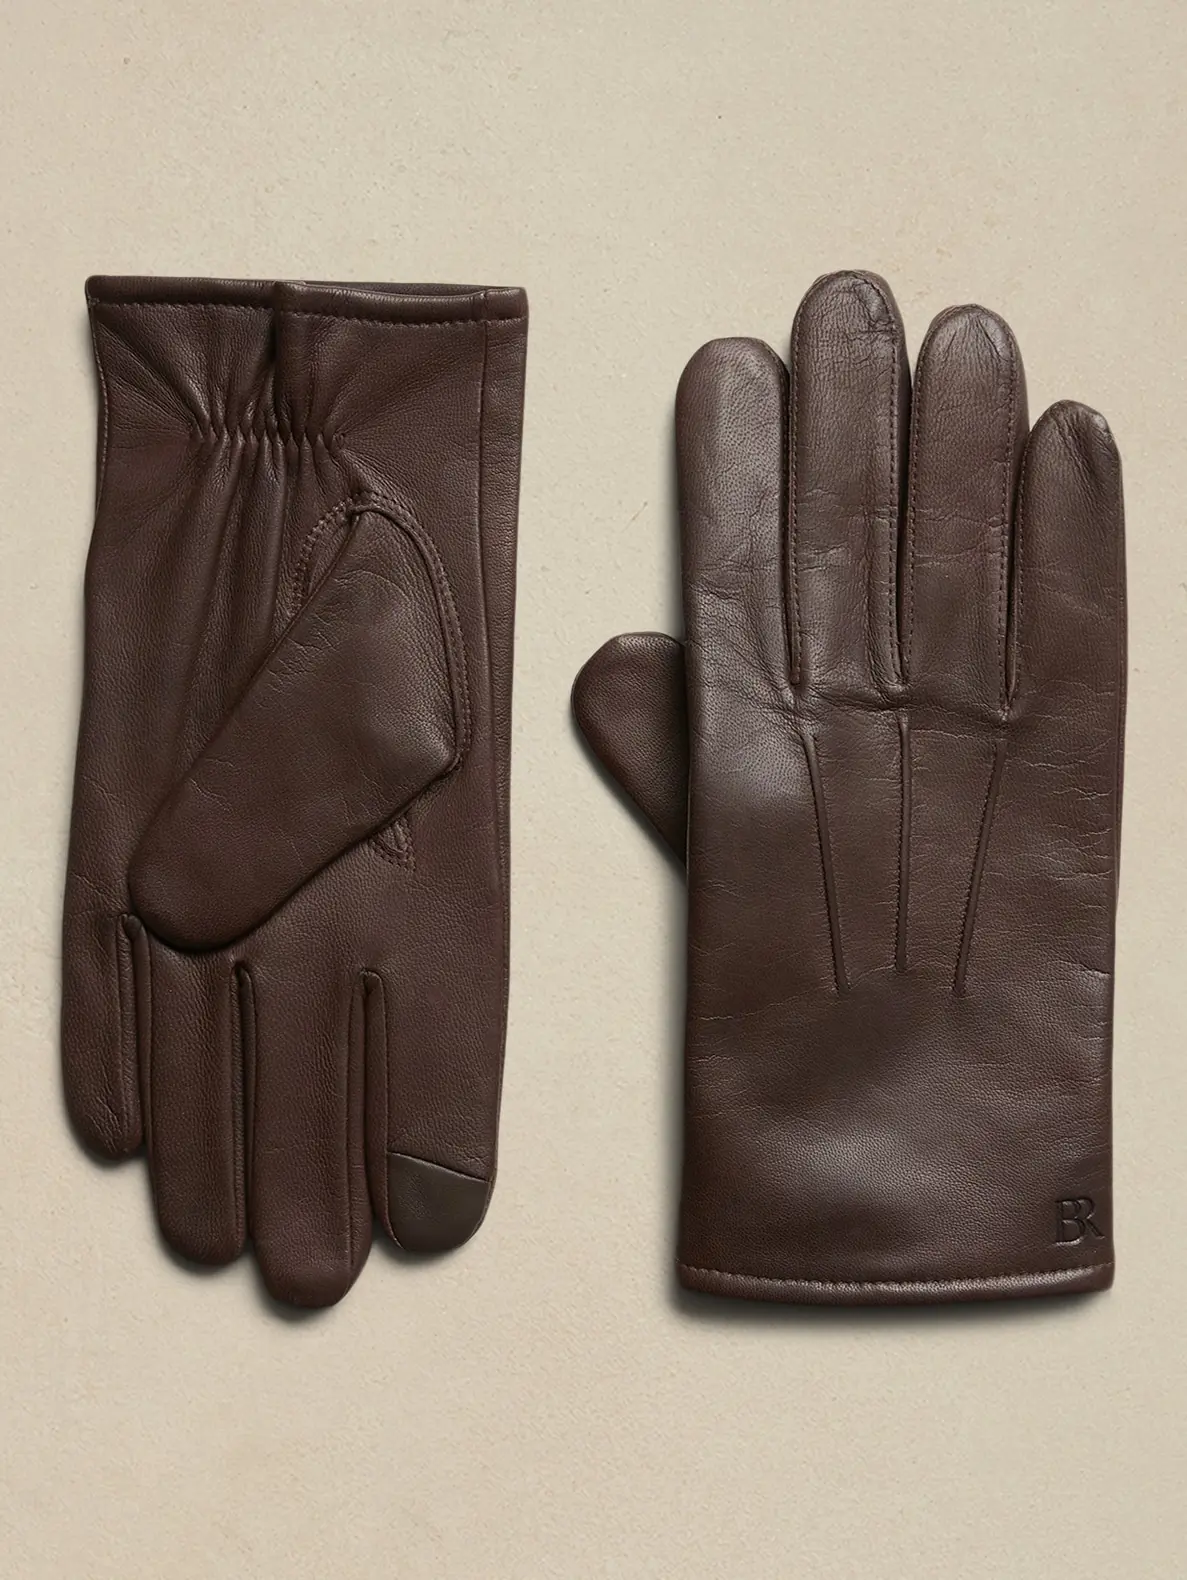 Banana Republic Leather Dress Gloves brown. 1